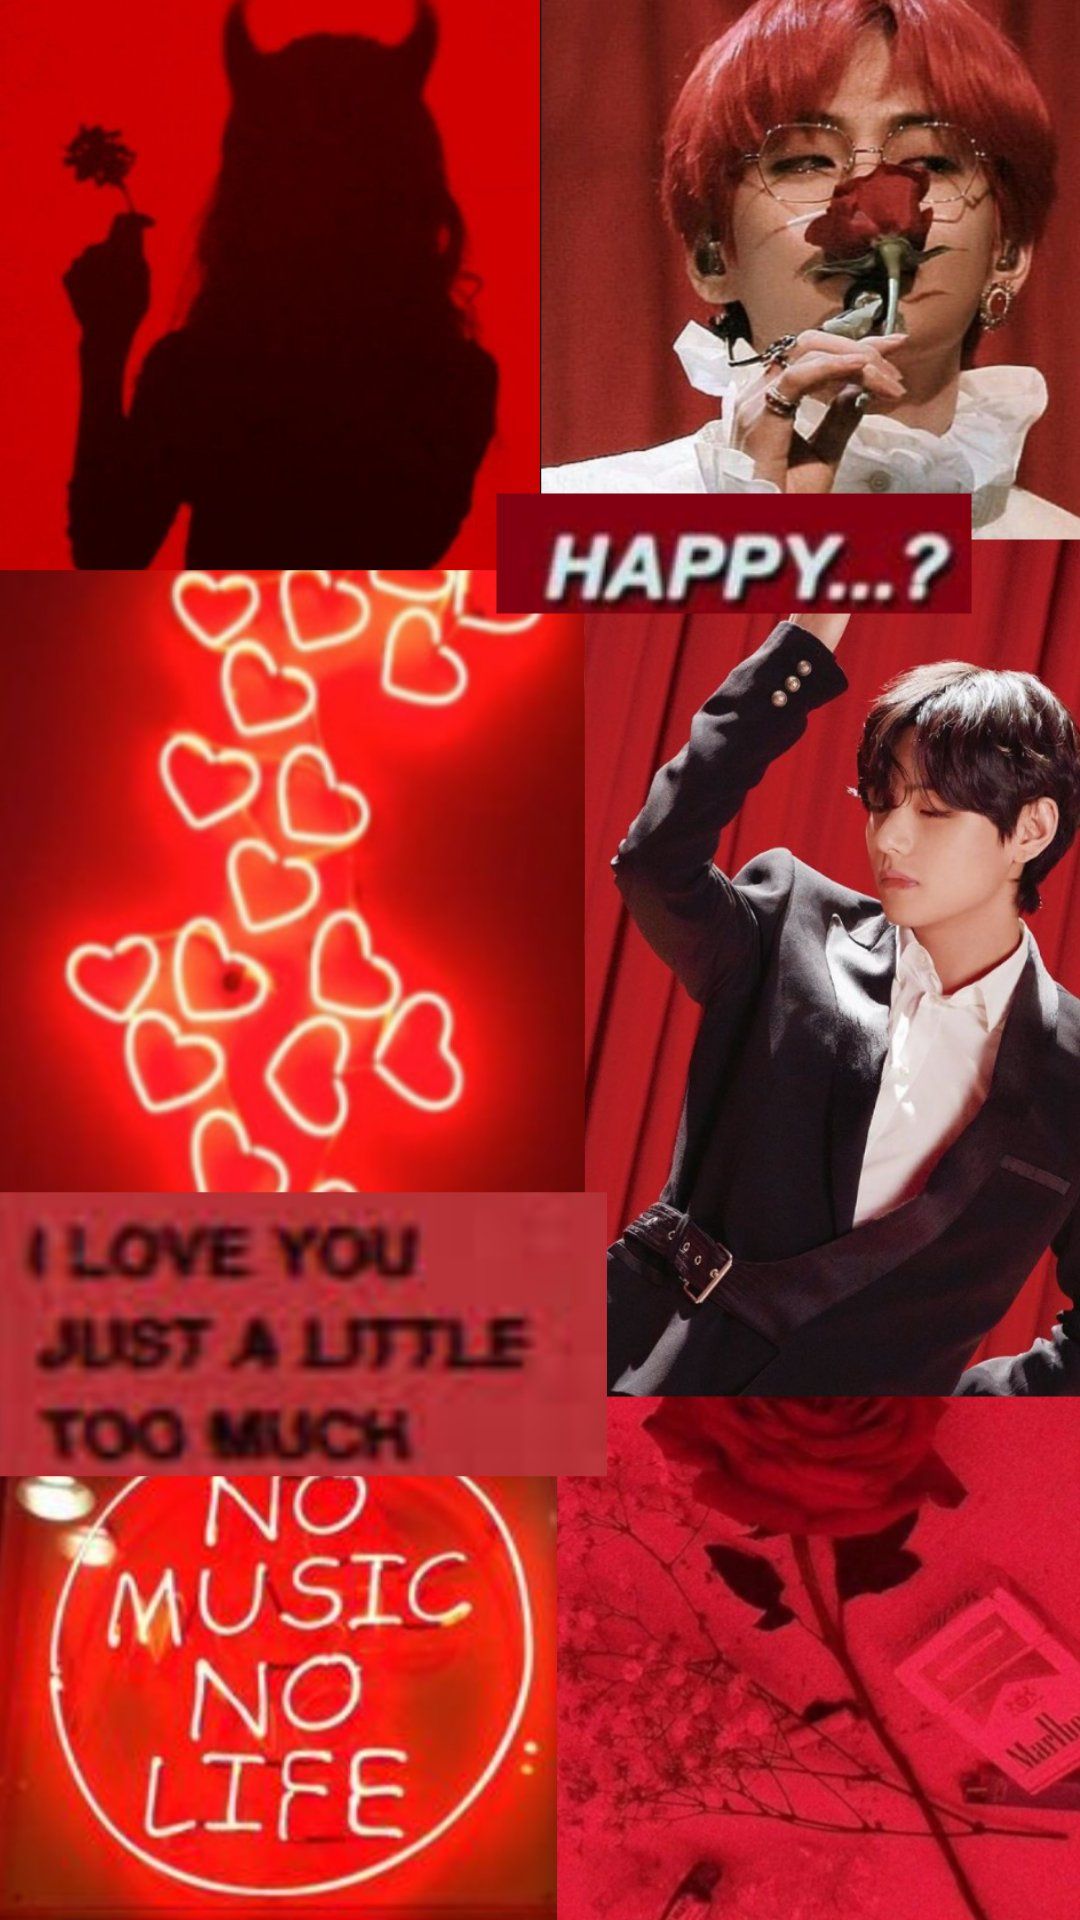 Black_Roses, Raging red Aesthetic Kim Taehyung Wallpaper! I decided to make it because Red Aesthetic Kim Taehyung wallpaper are rarely found. Here it is❤️❤️❤️ #TAEHYUNG #BTSARMY #aesthetic